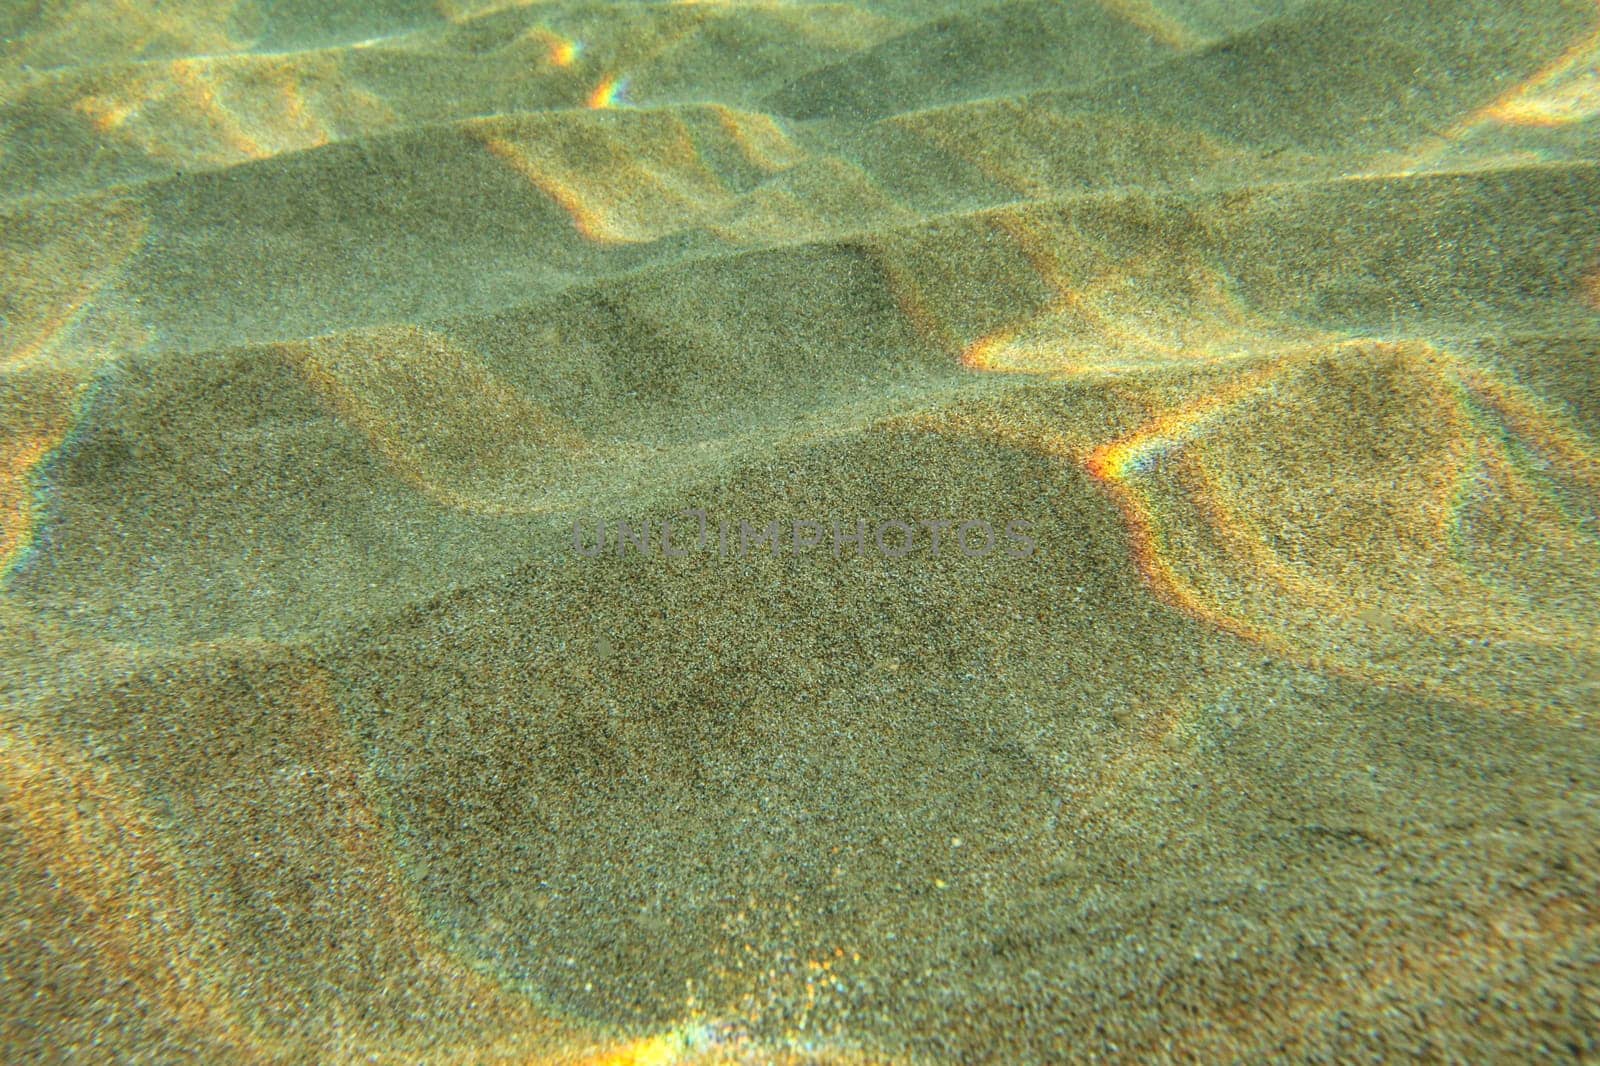 Underwater photo - sun shining on sand "dunes" in shallow water, casting small "rainbows". Abstract marine background.